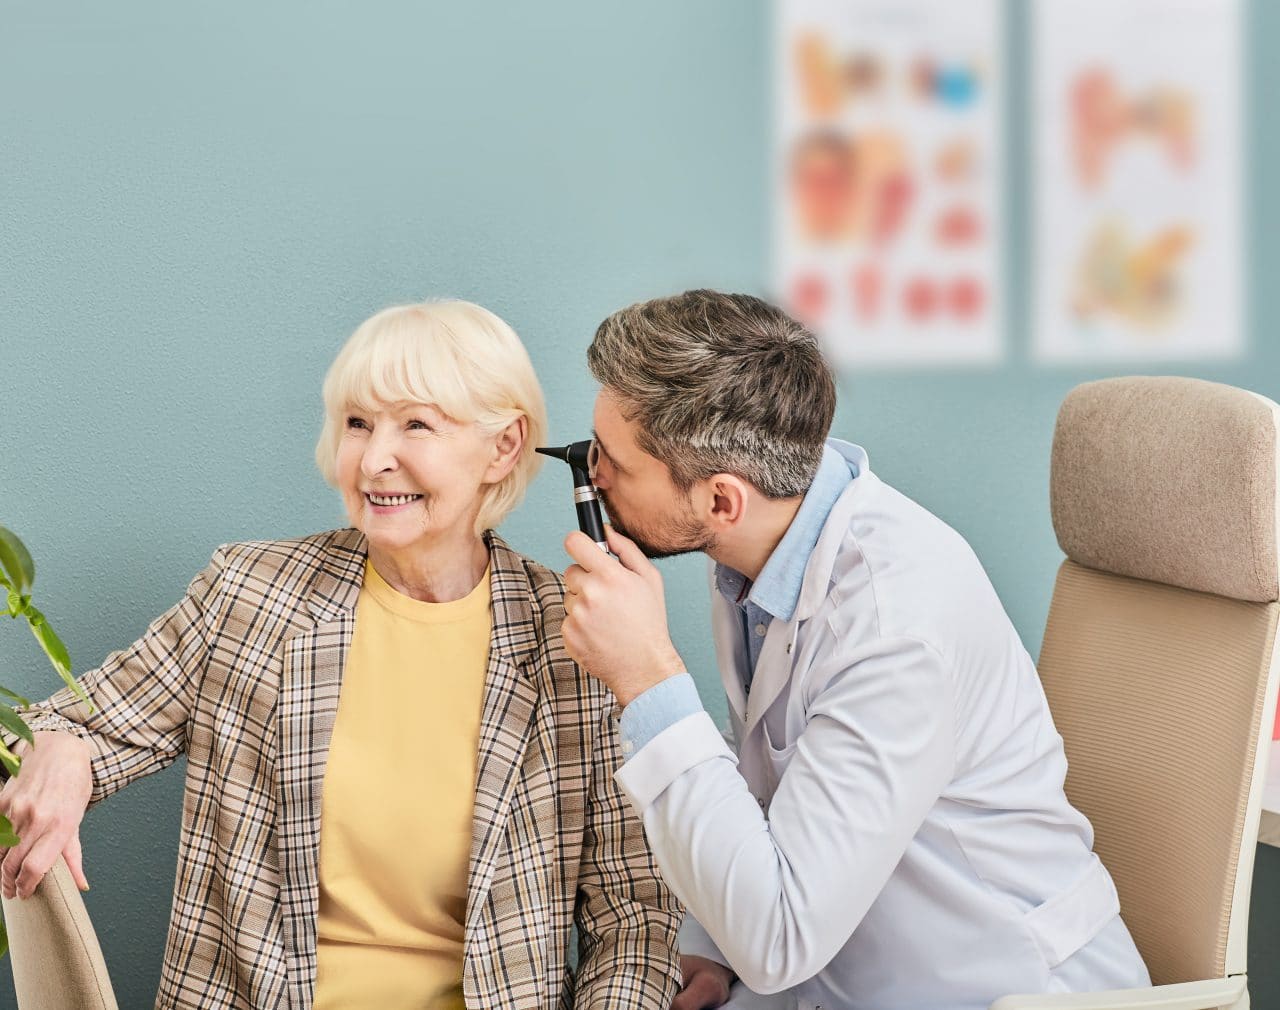 Older woman getting her ears checked by a doctor.